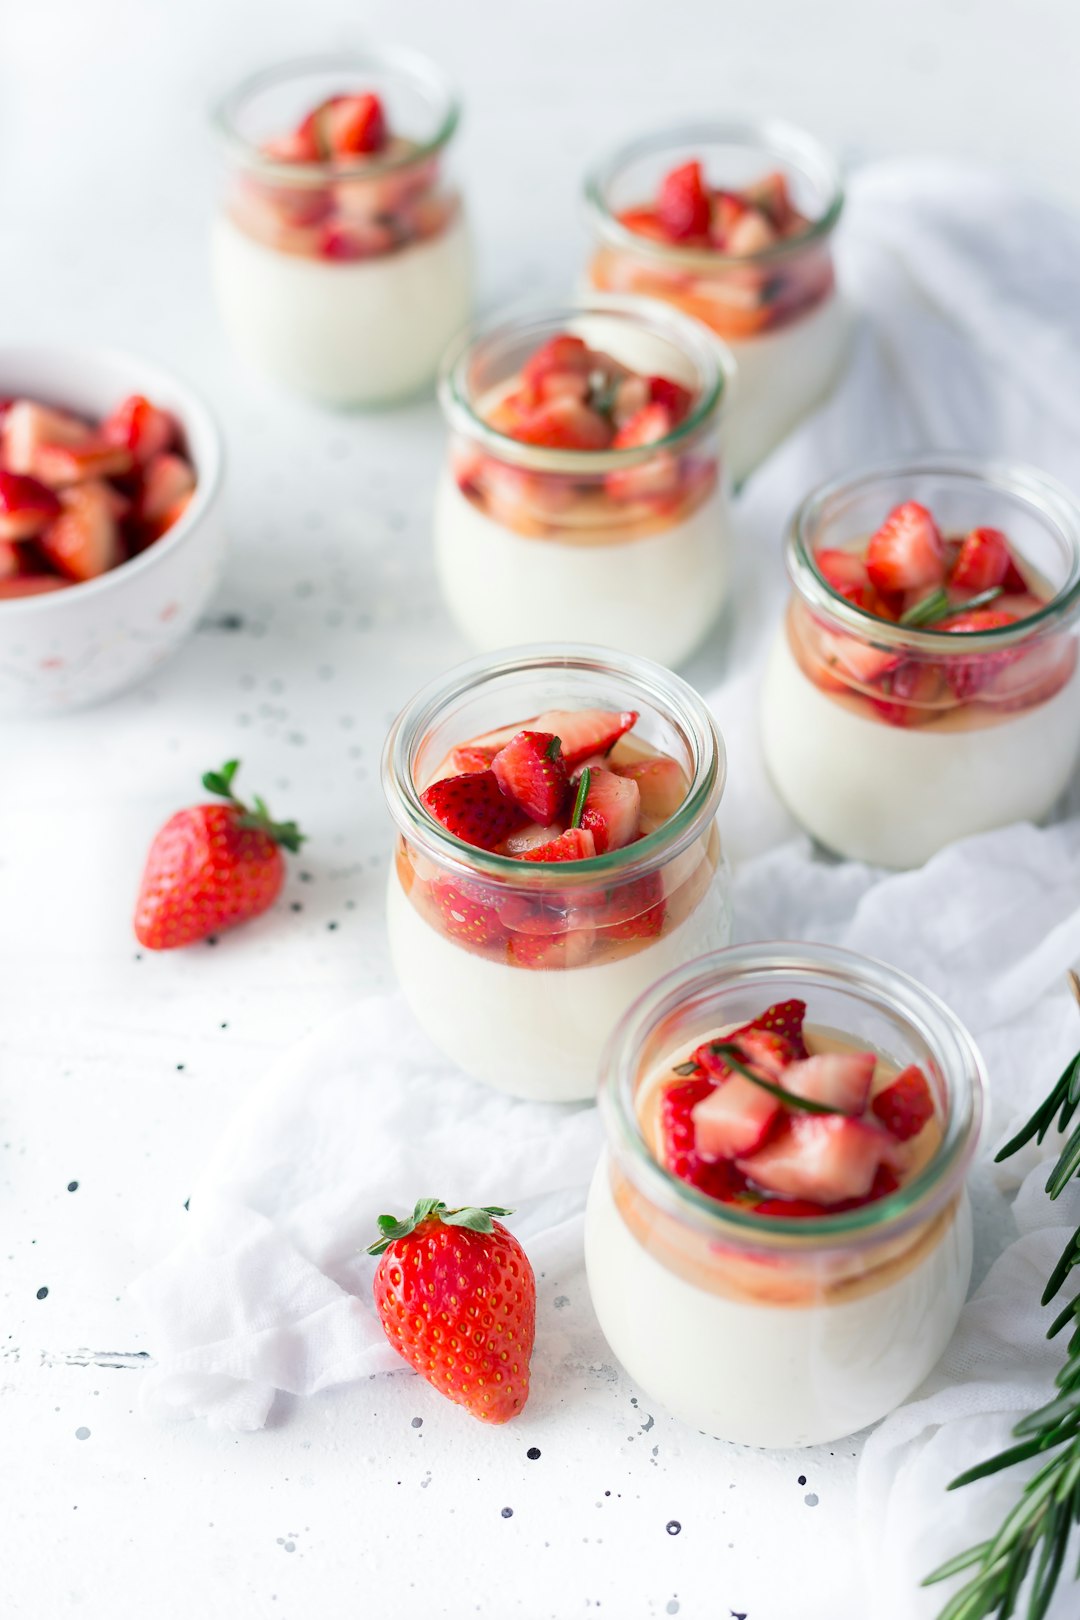 Little jars make for great single servings, especially when topped with macerated strawberries.